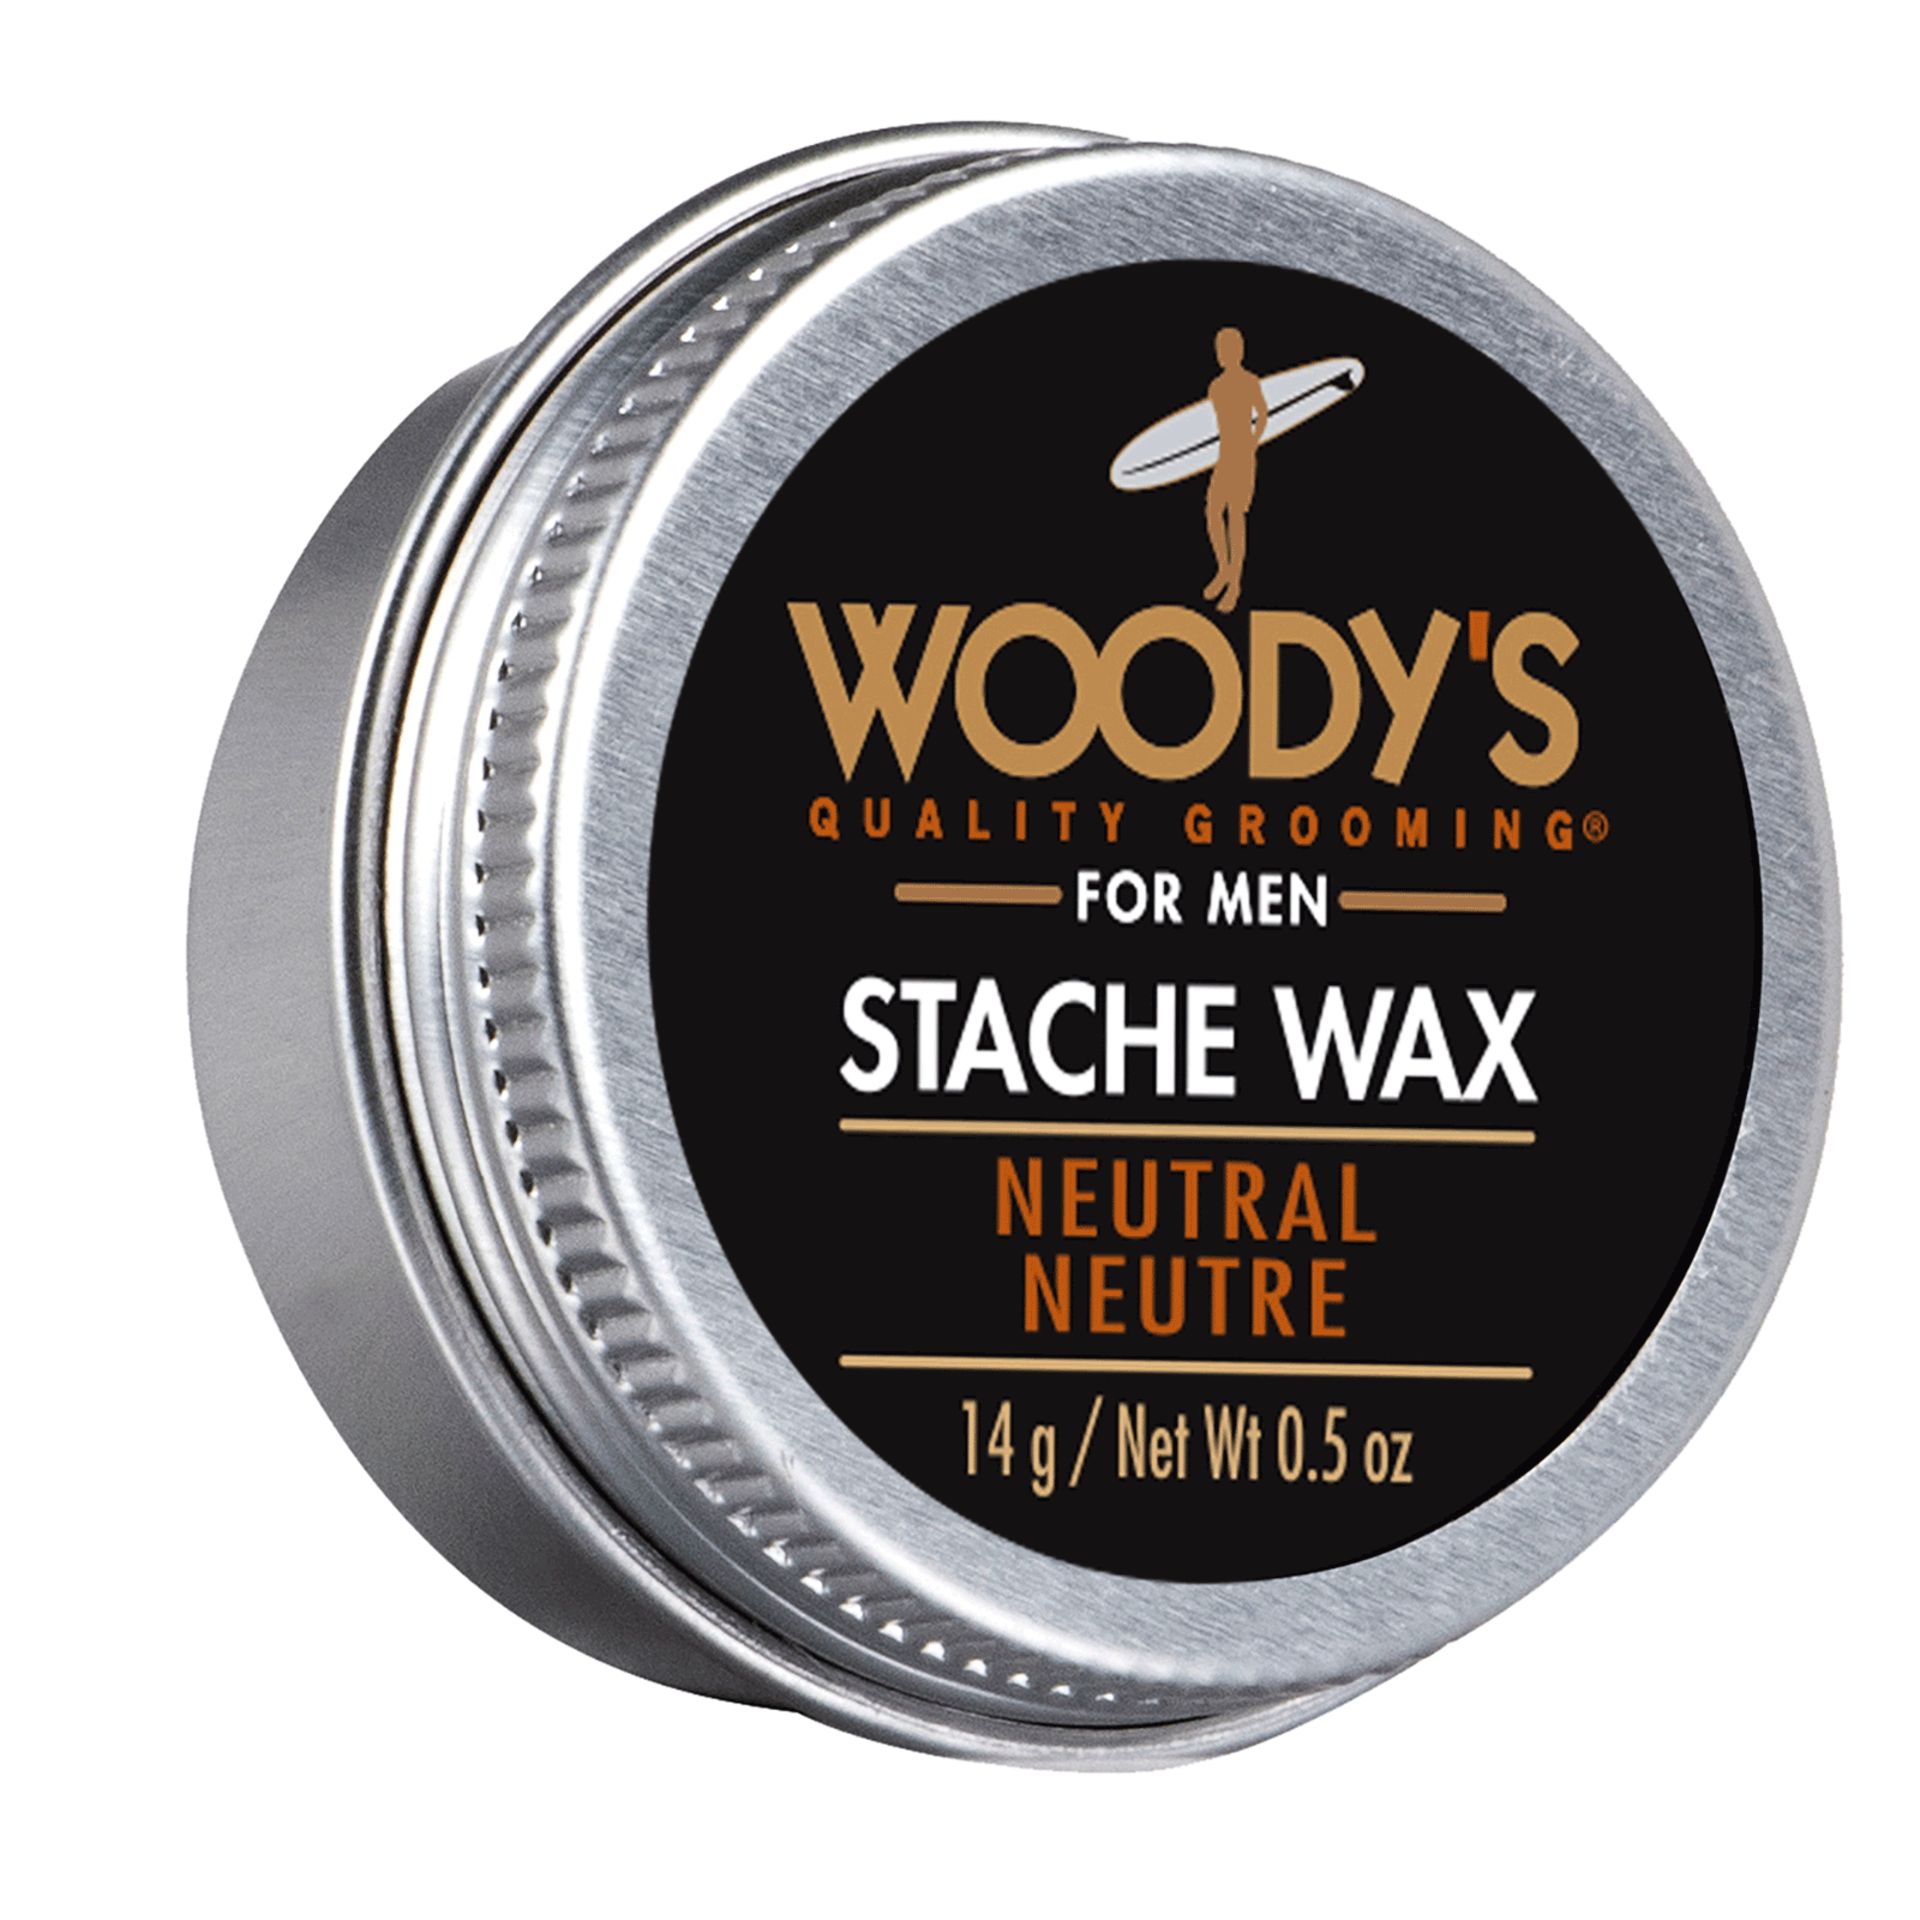 V Brand New WOODY'SWoody's For Men 14g Stache Wax